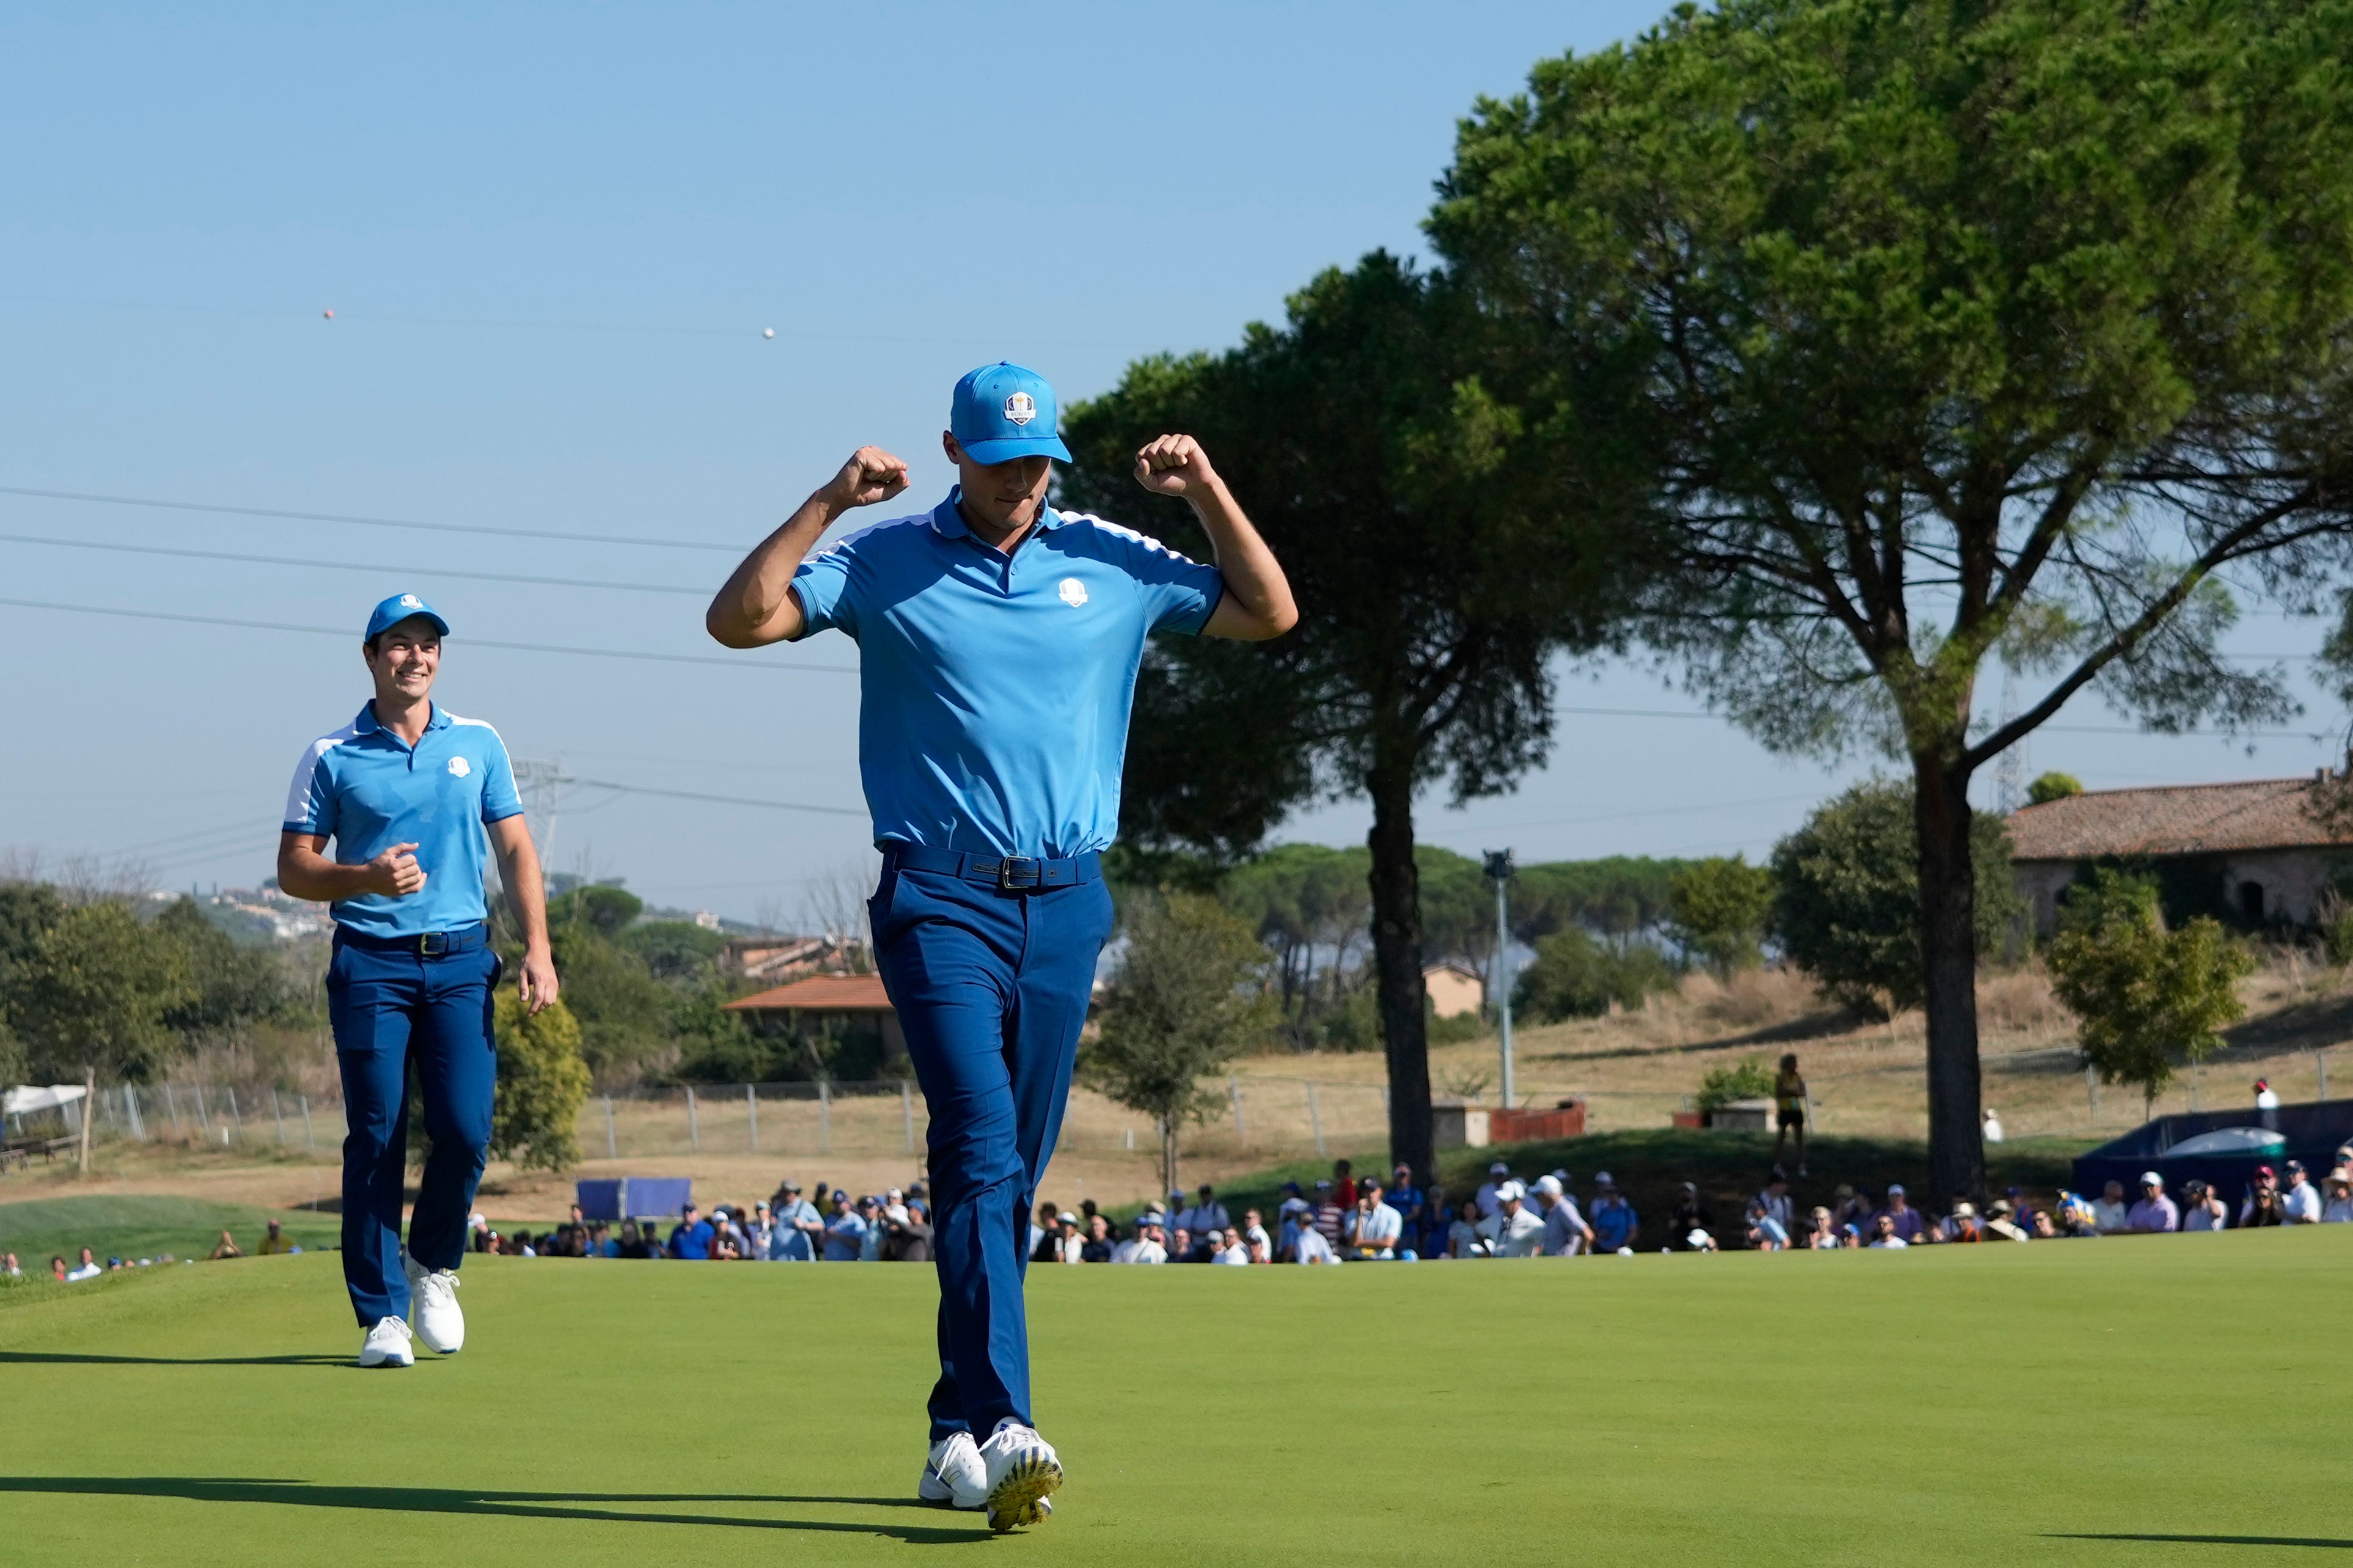 Aberg was impressive for Europe at the Ryder Cup